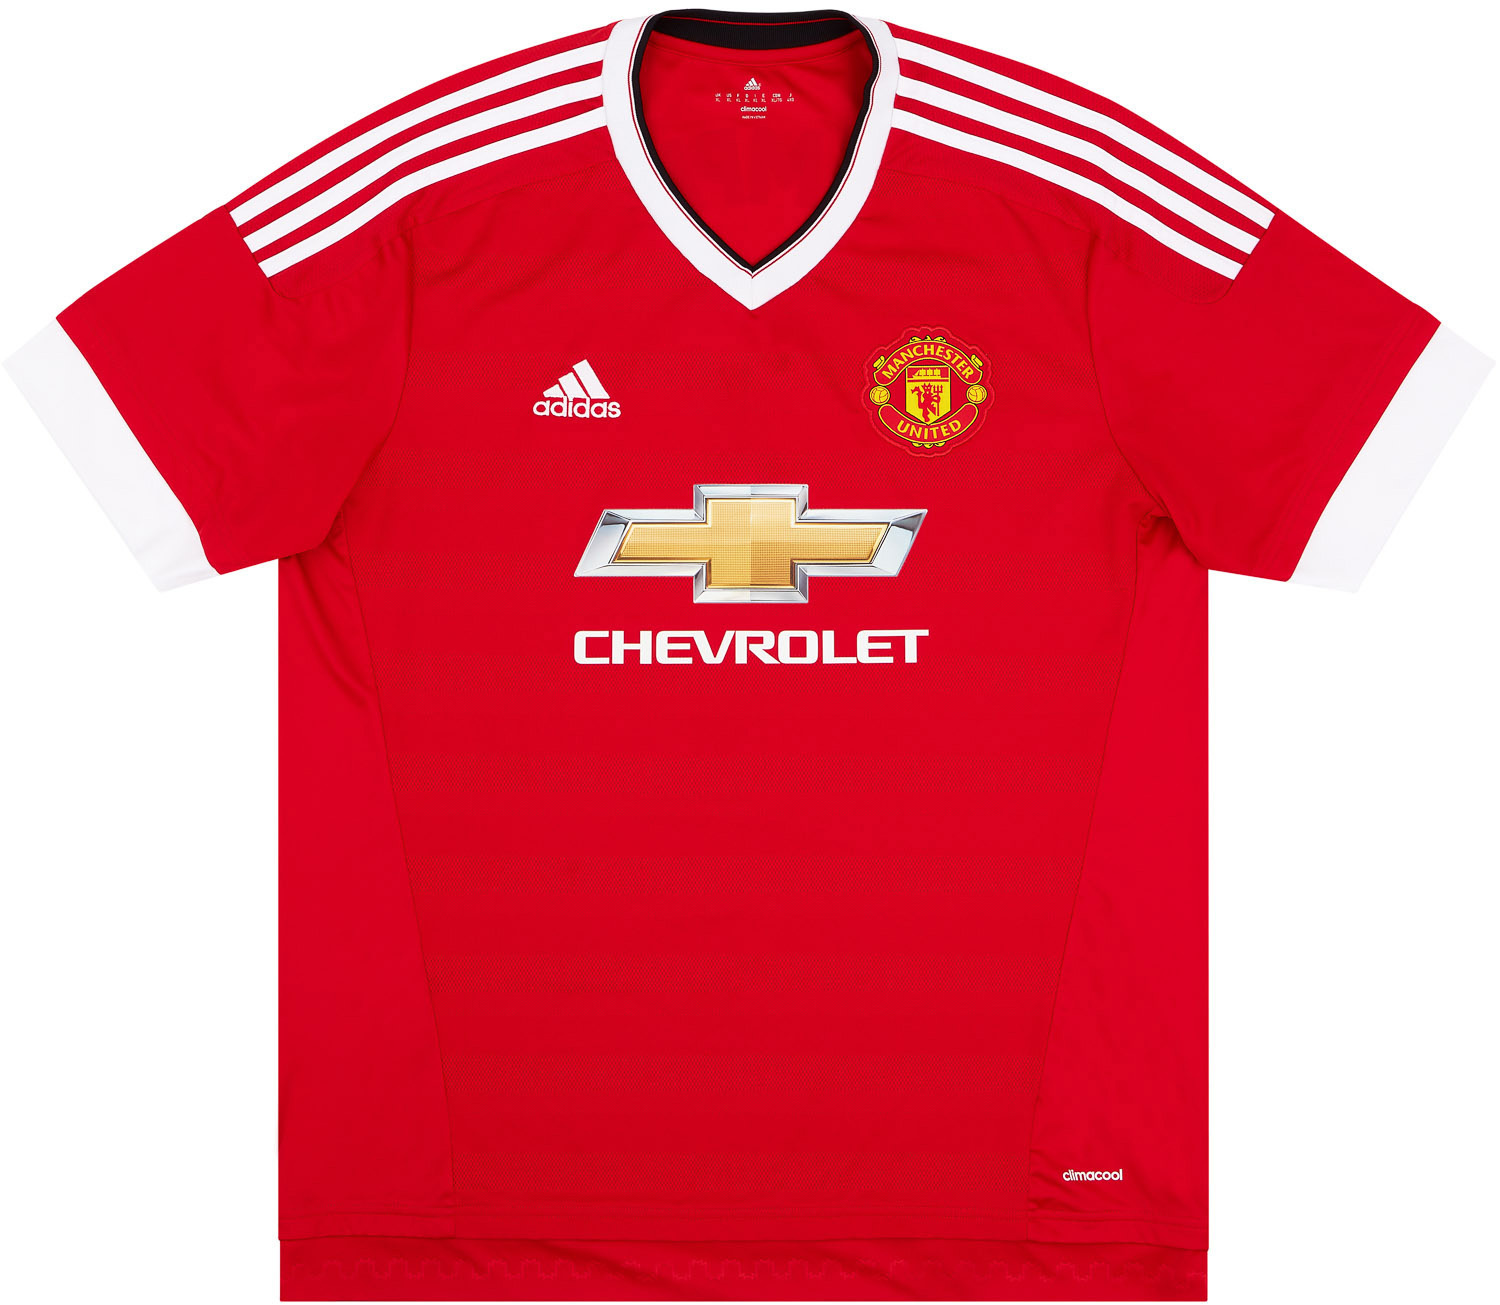 2015-16 Manchester United Home Shirt - 7/10 -